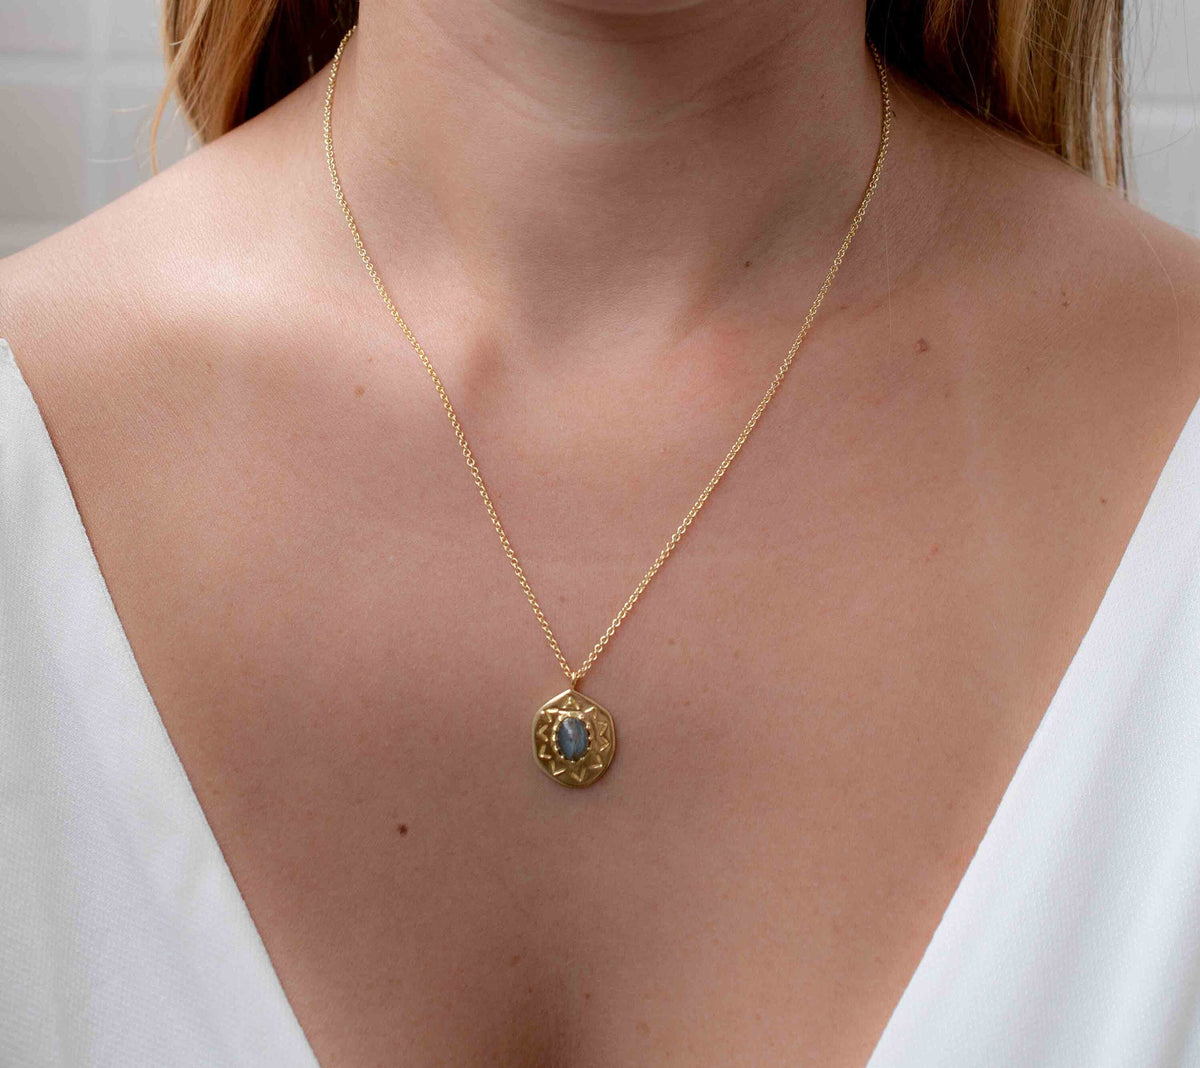 Moonstone, Labradorite or Aqua Chalcedony  Necklace * Dotted chain Gold Plated 18k * Gemstone * Modern * Layered * BJN106